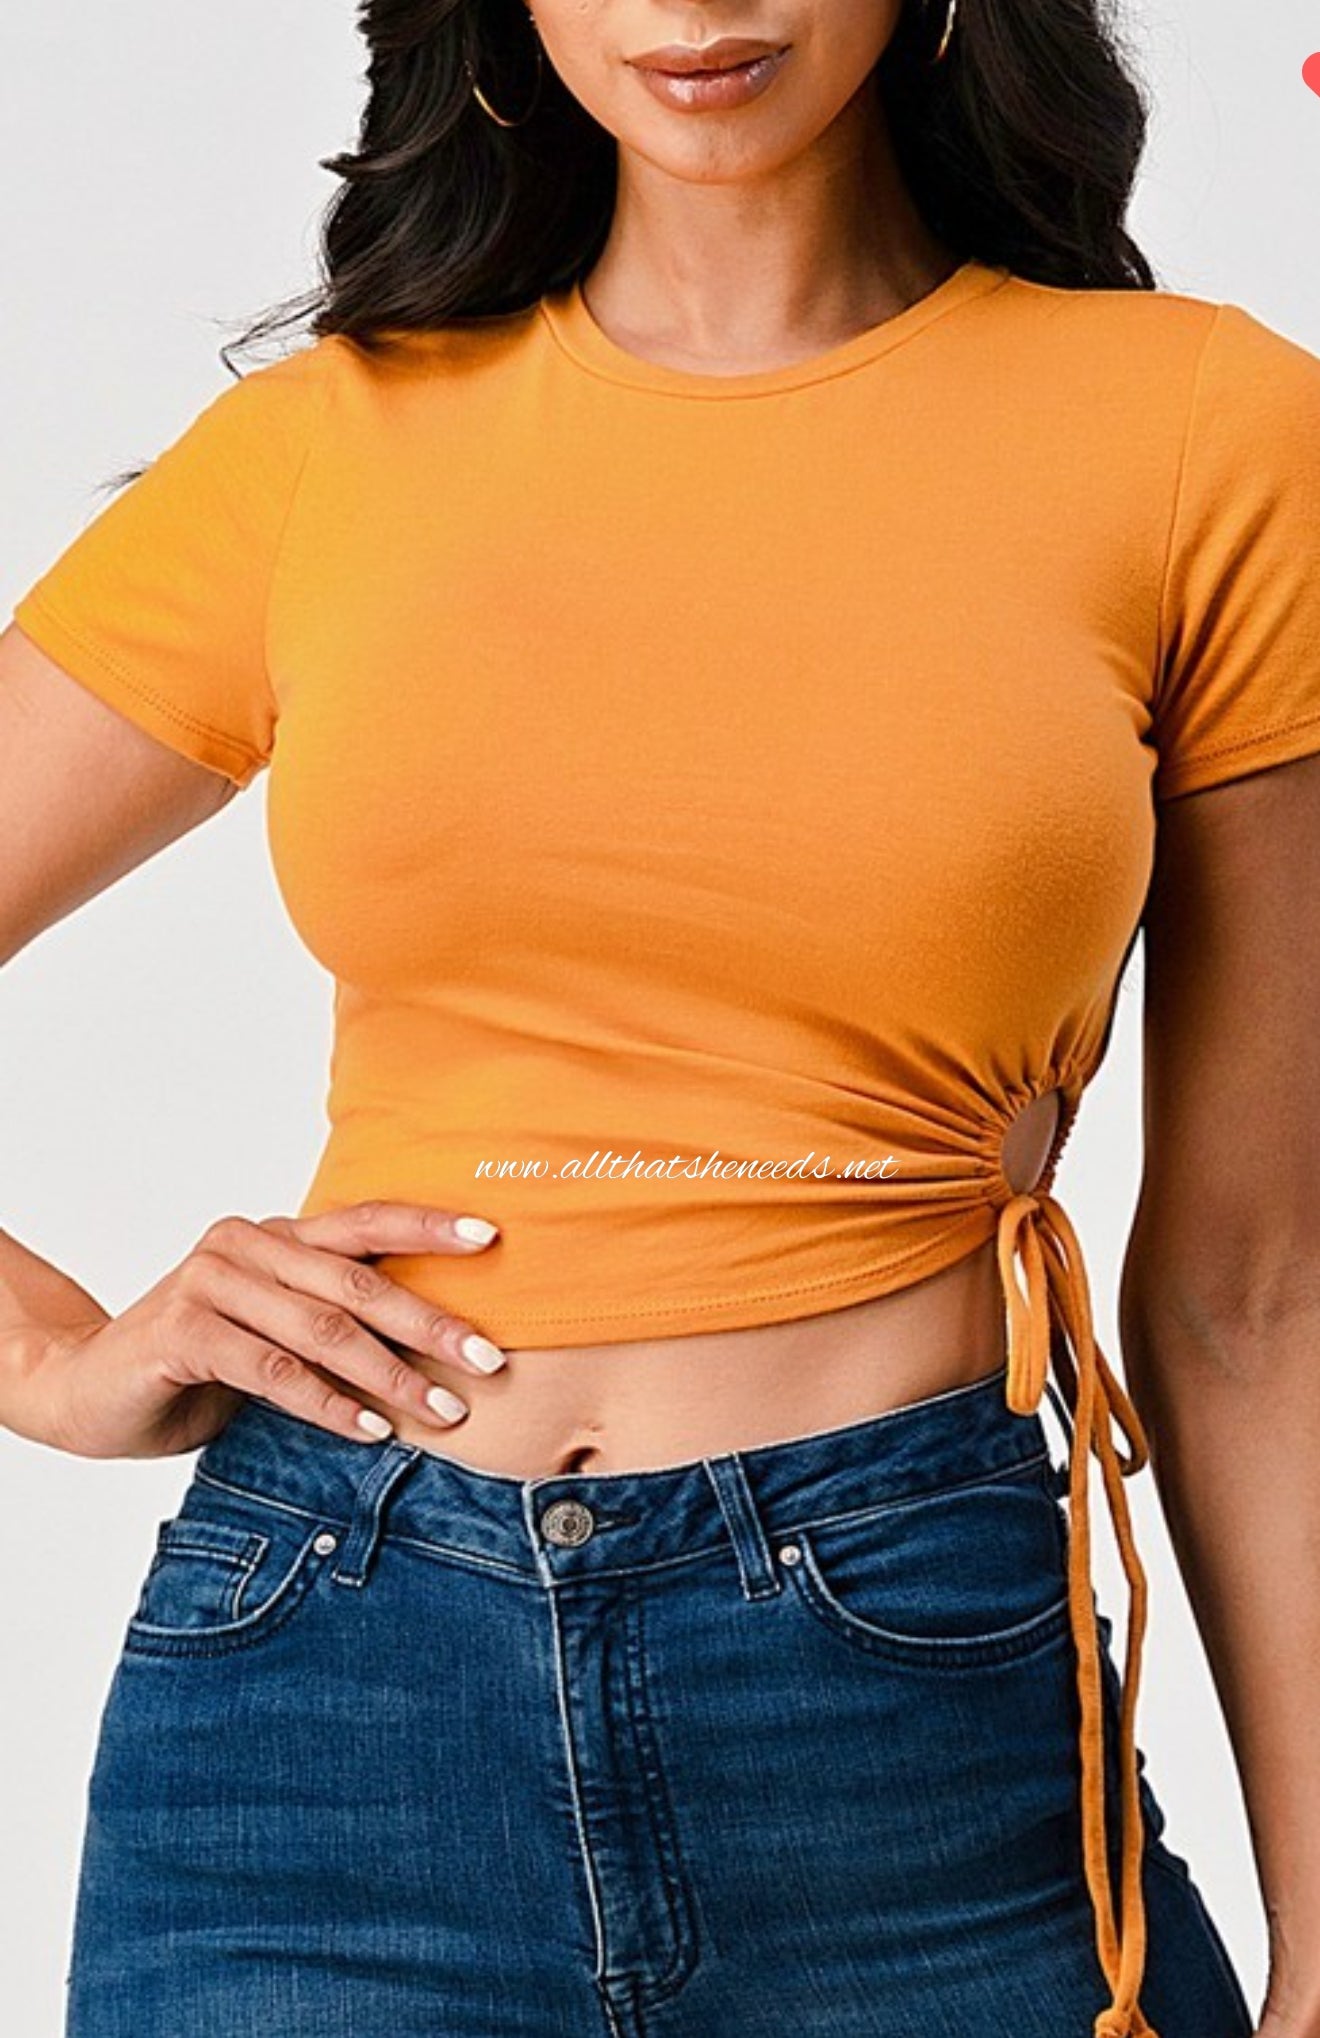 Hole On Crop Top